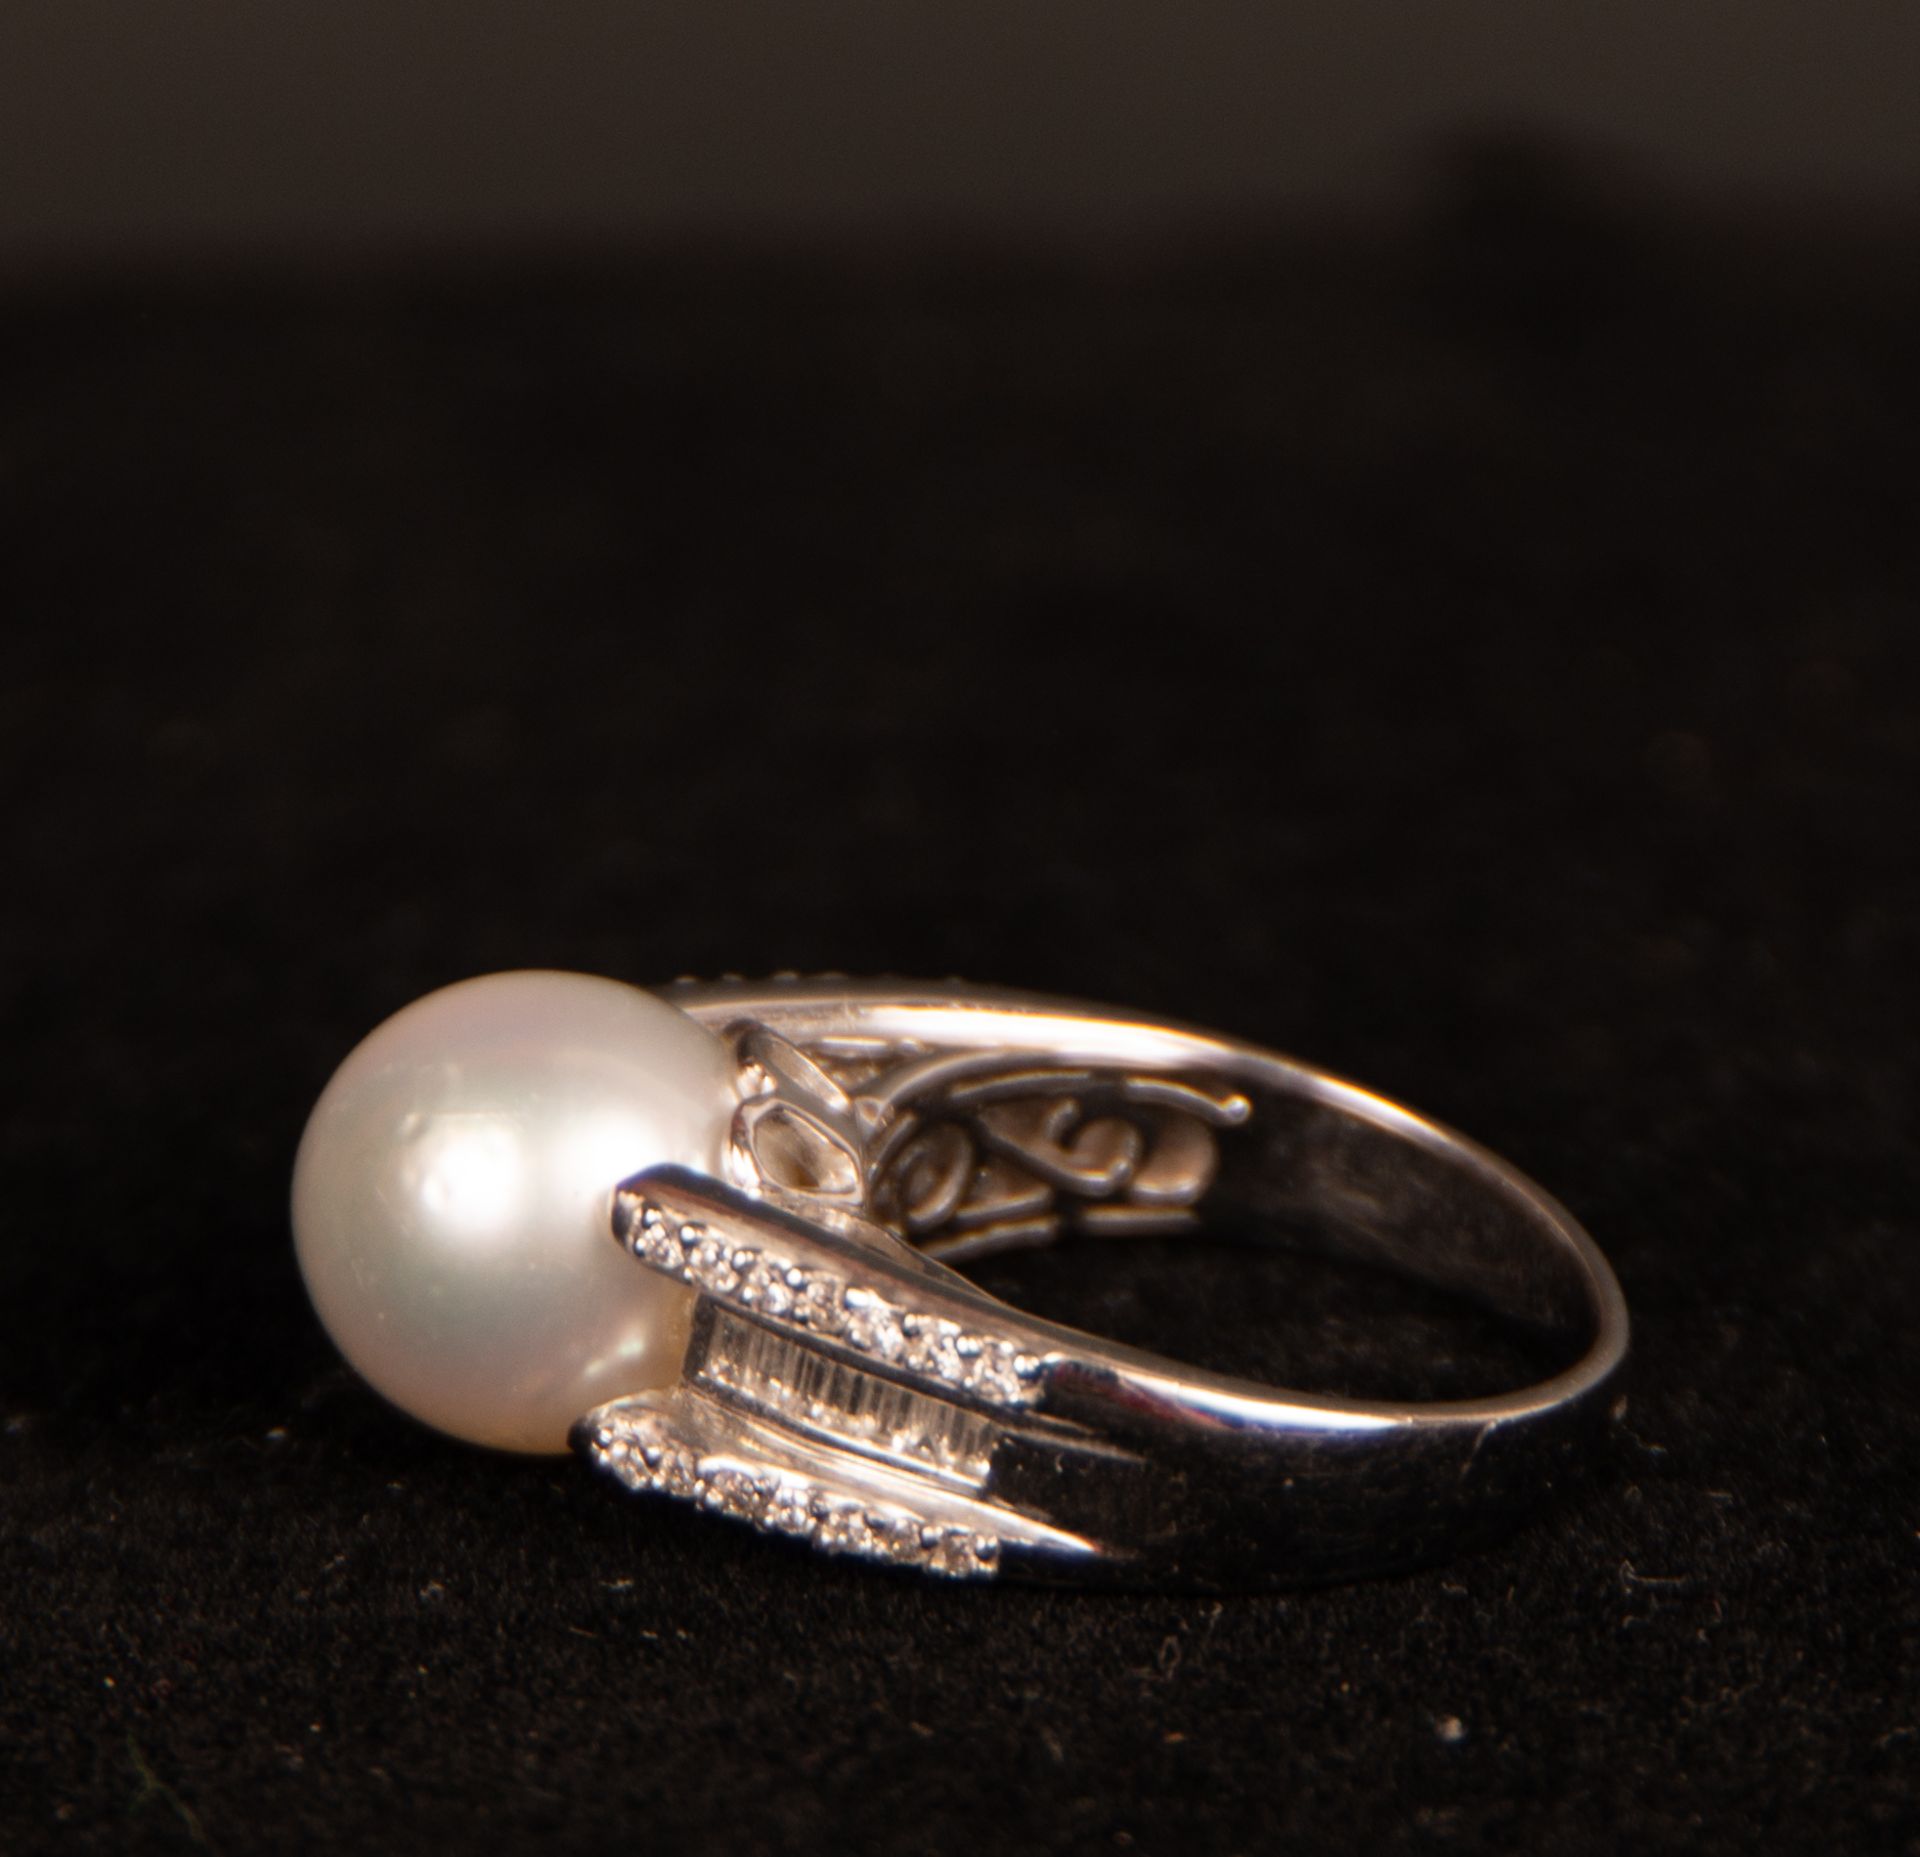 Ring in White Gold with a central Pearl and diamonds set - Image 2 of 4